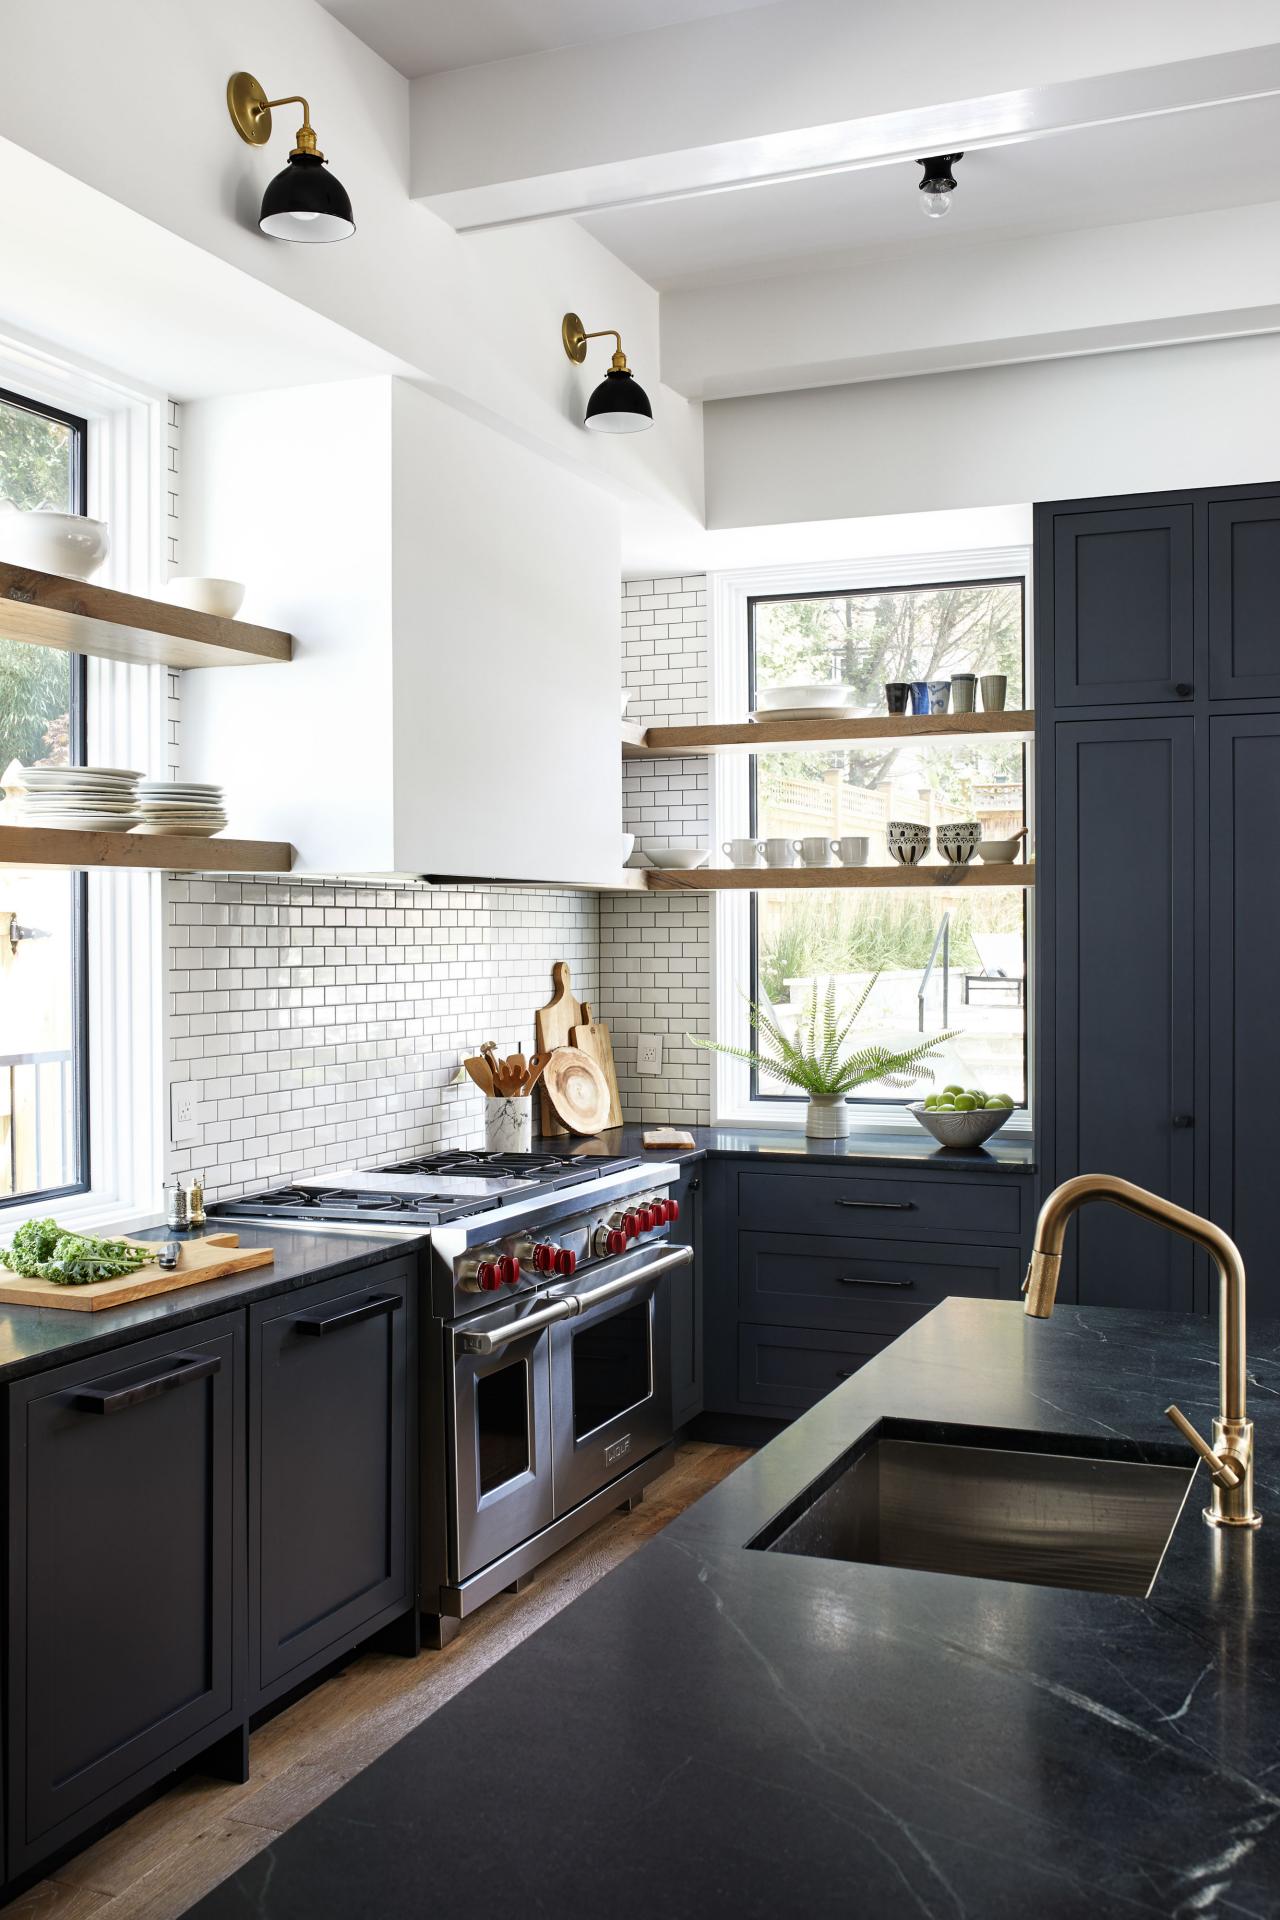 38 Black and White Kitchens to Outlast Every Trend